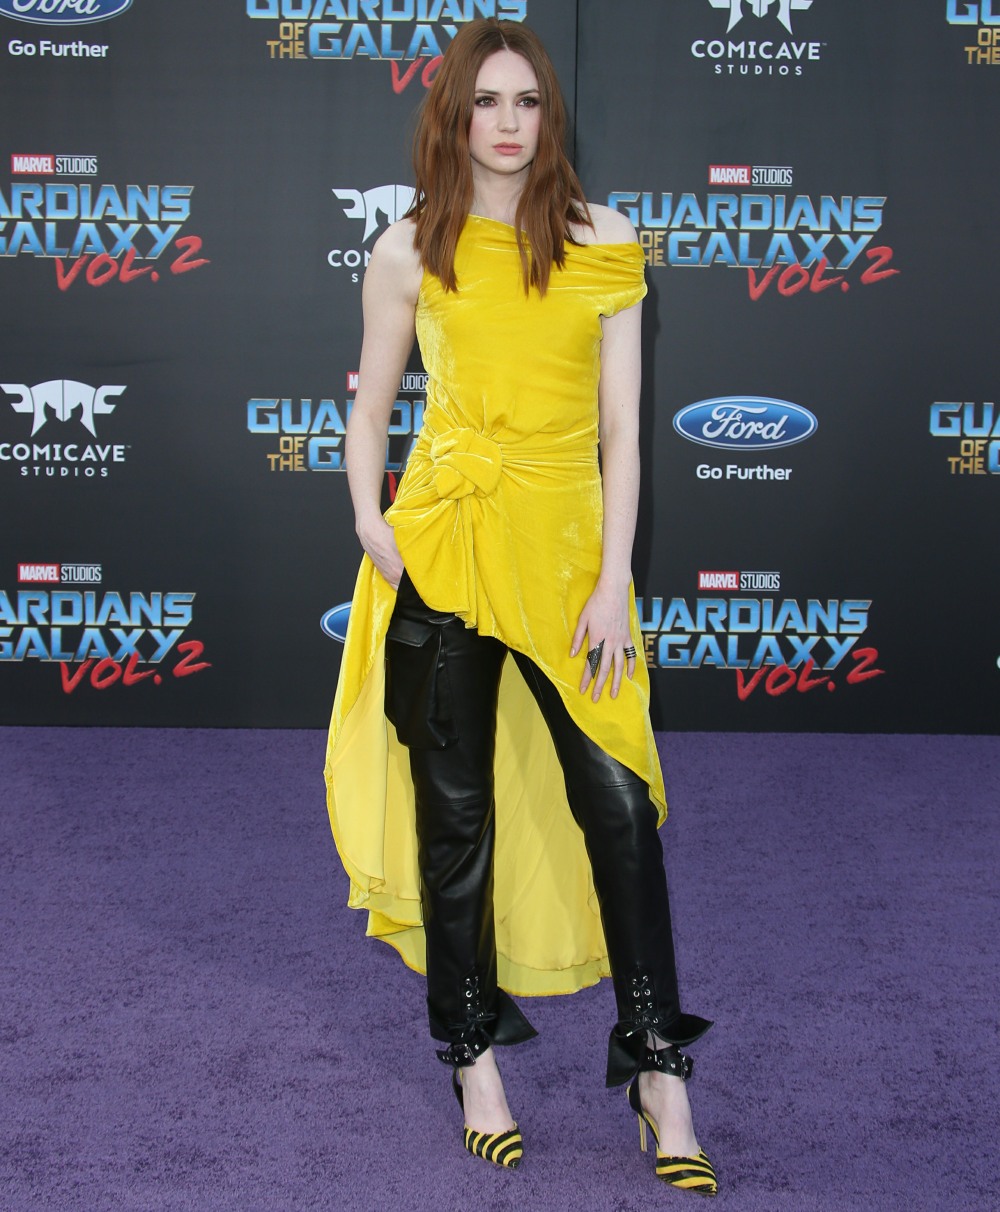 The world premiere of Marvel Studios’ 'Guardians of the Galaxy Vol. 2.' - Arrivals